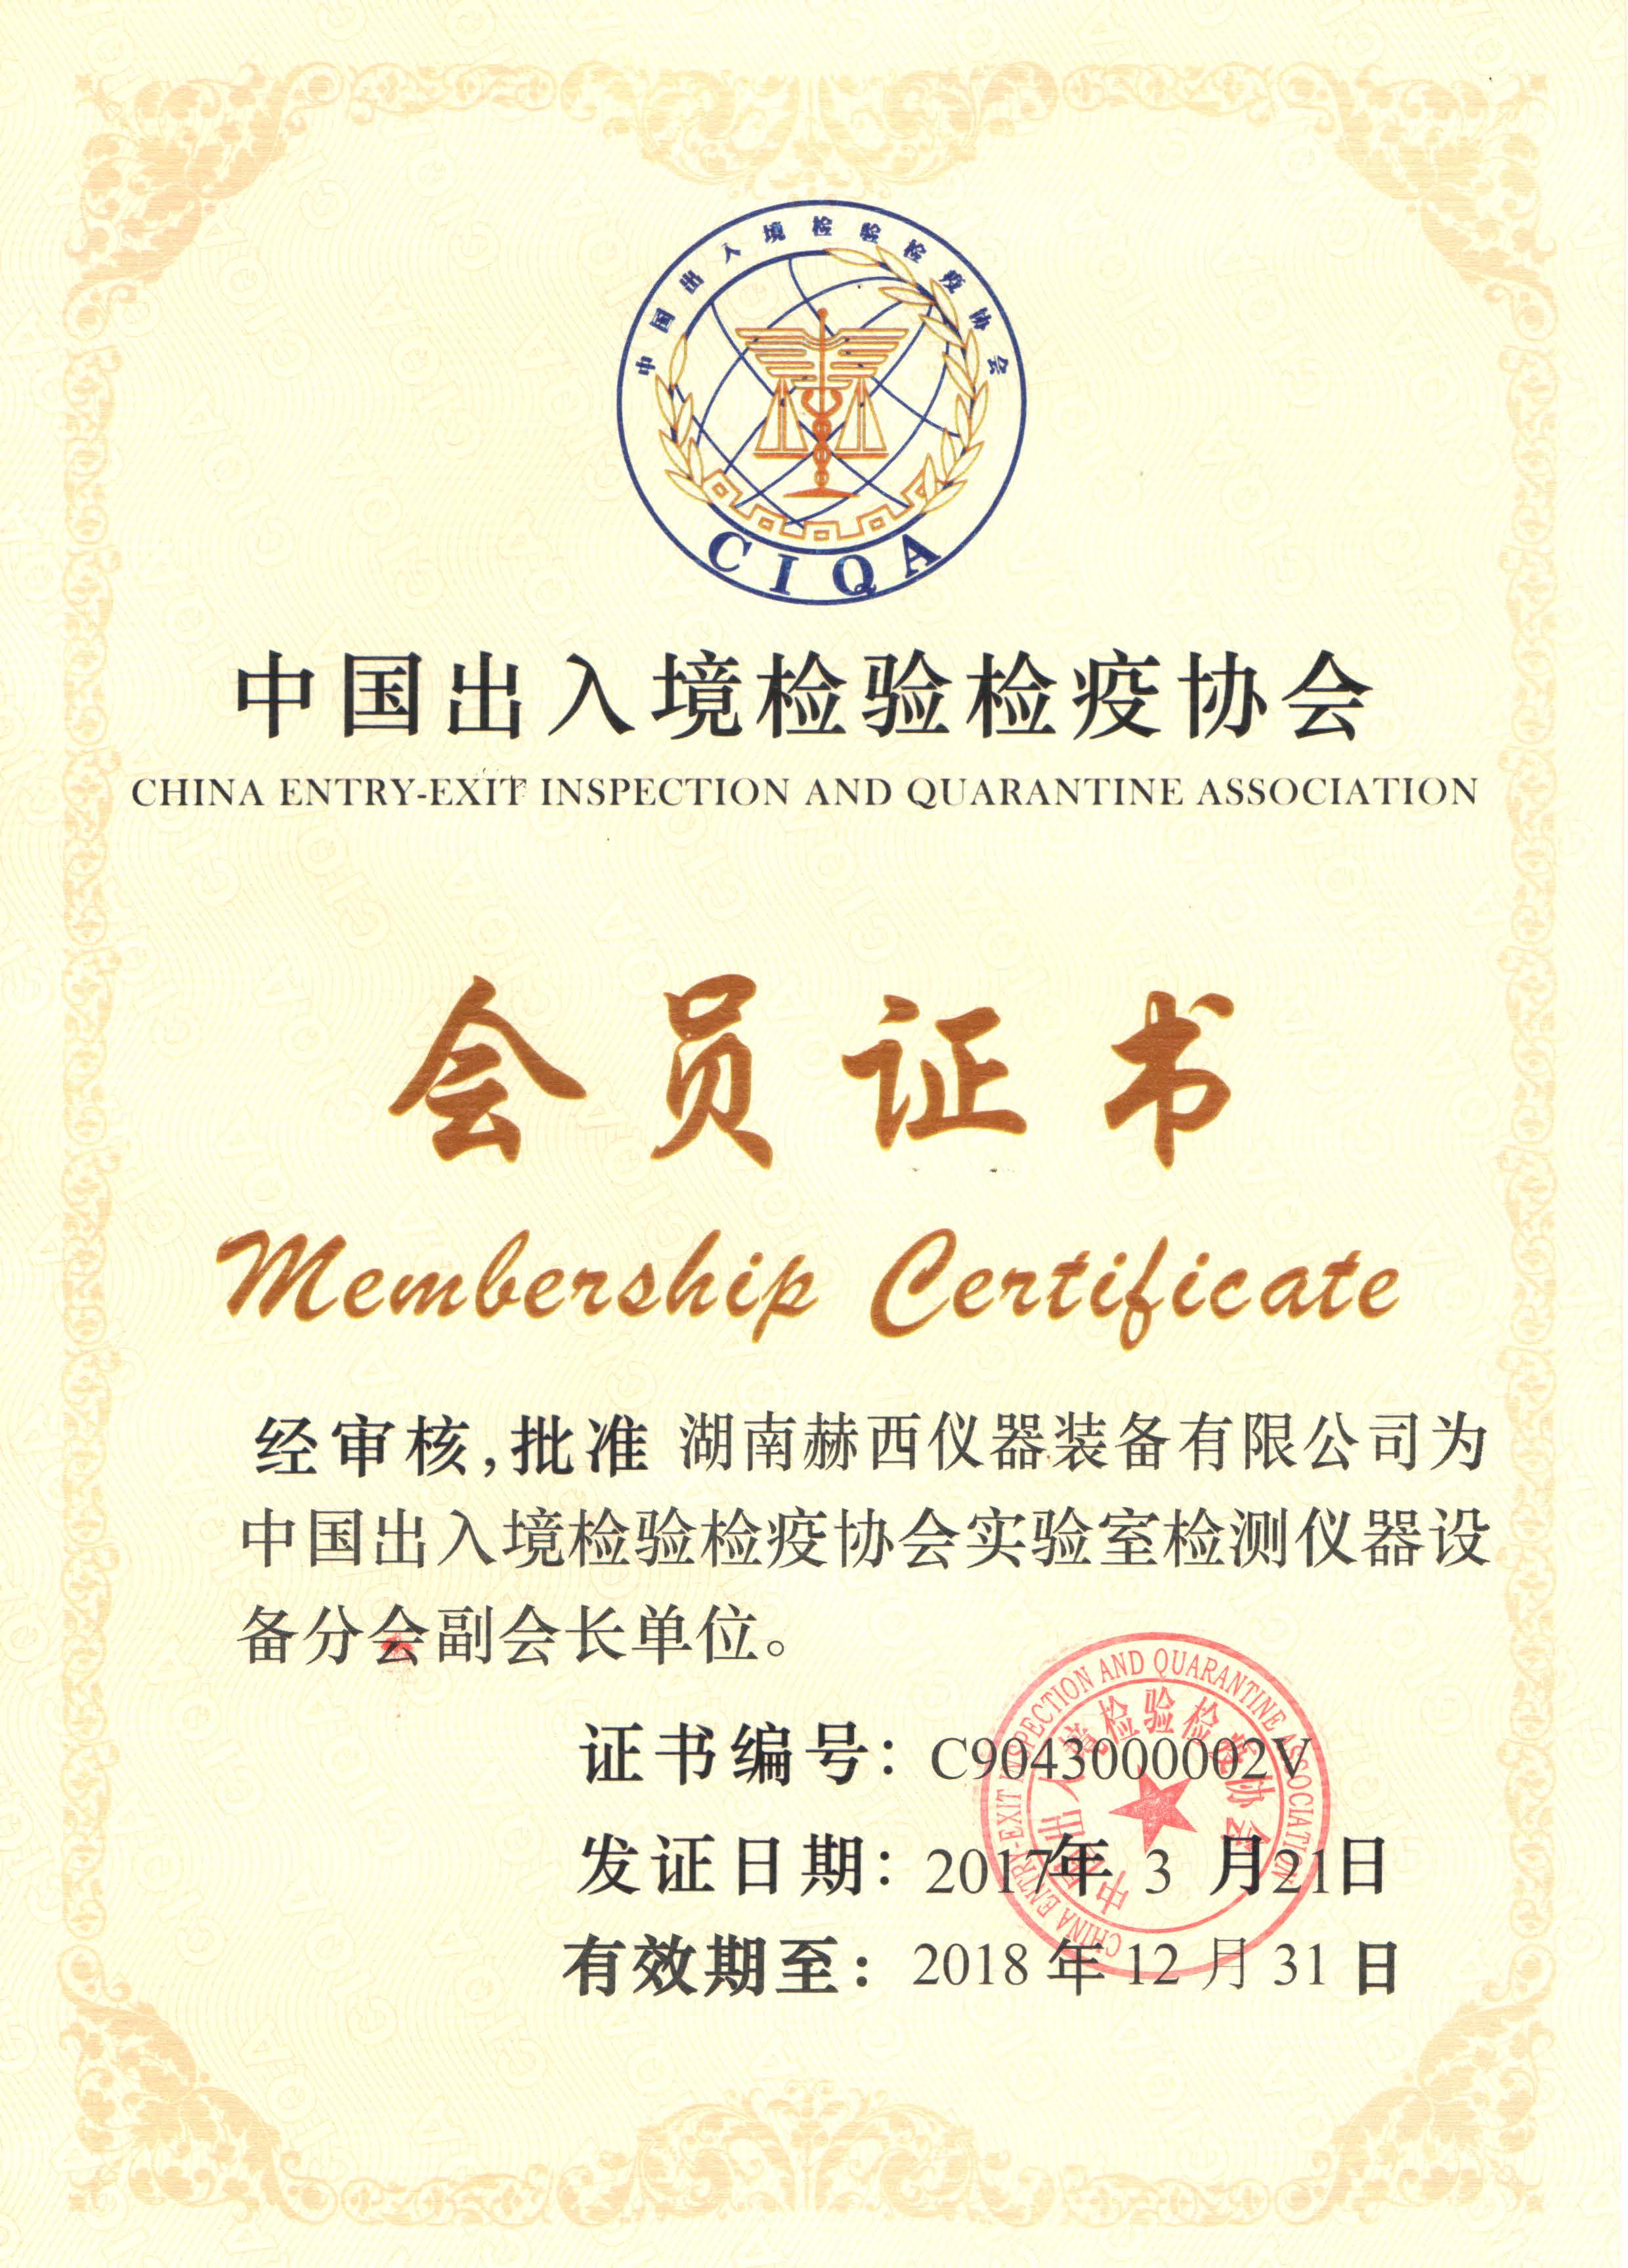  certificate of China entry and exit inspection and Quarantine Association